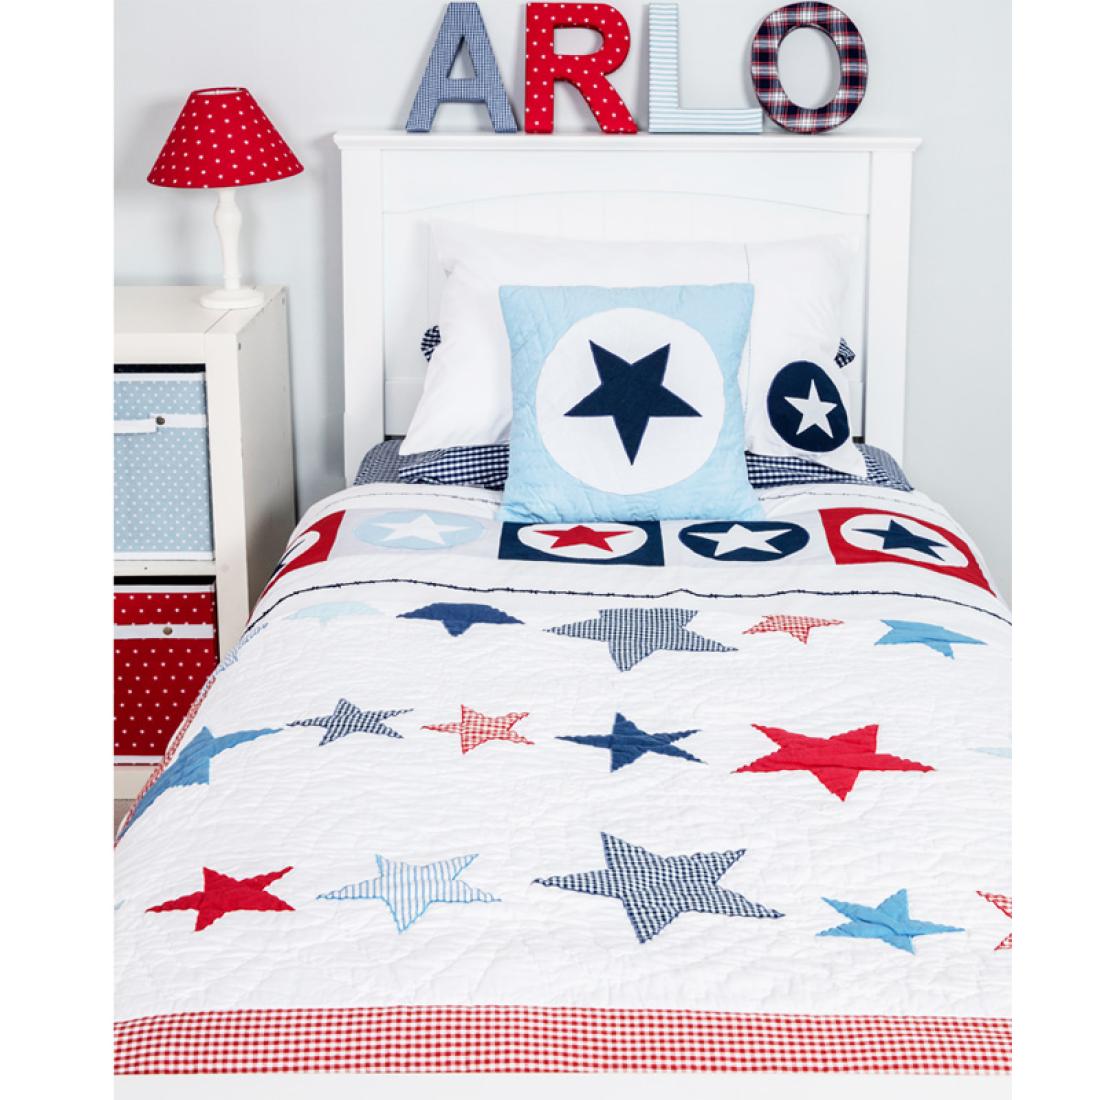 Big Star Single Quilt Childrens, How Big Is A Single Duvet Cover Uk